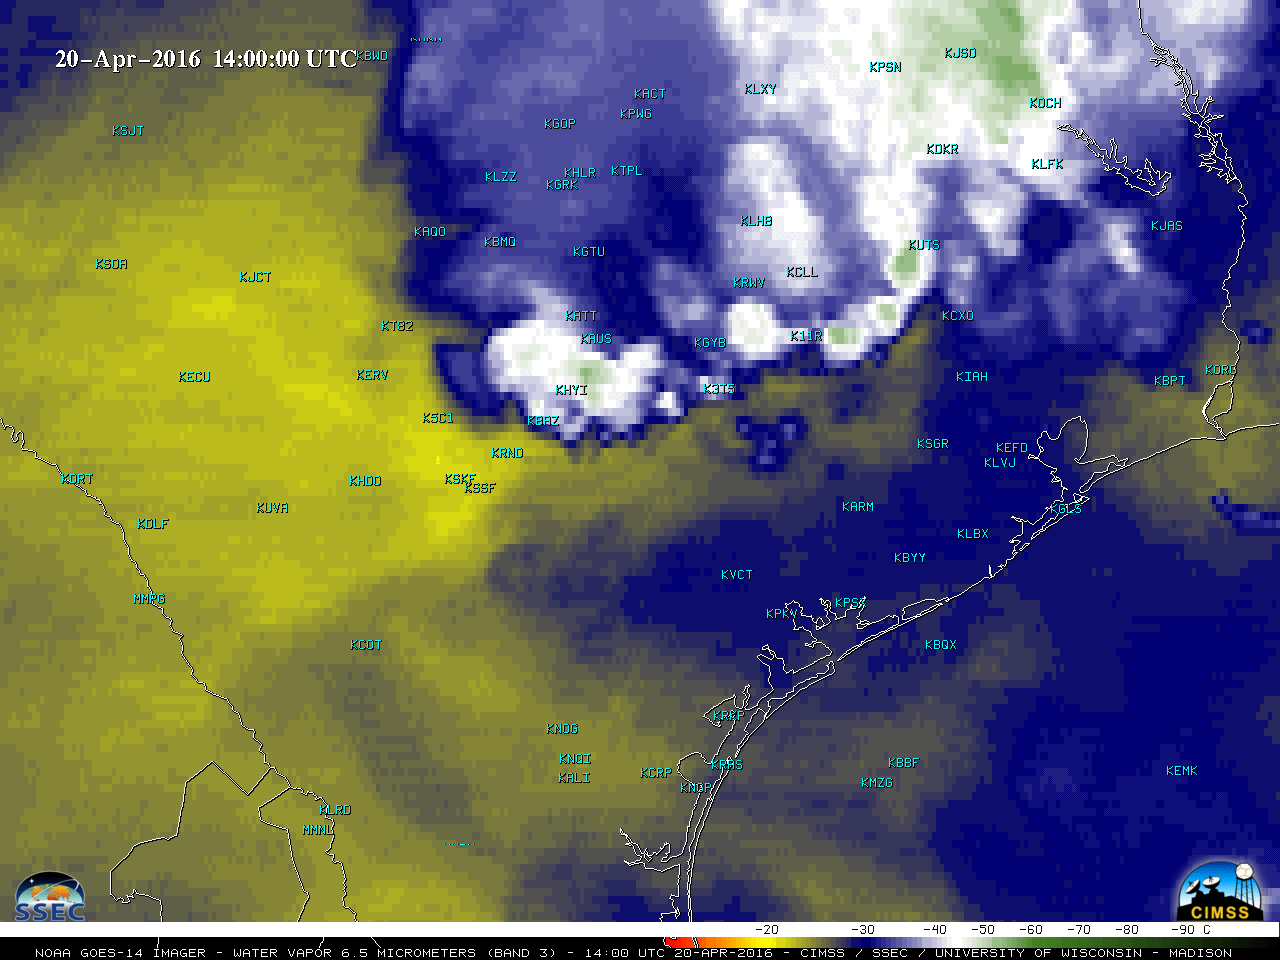 GOES-14 Water Vapor (6.5 µm) images [click to play MP4 animation]